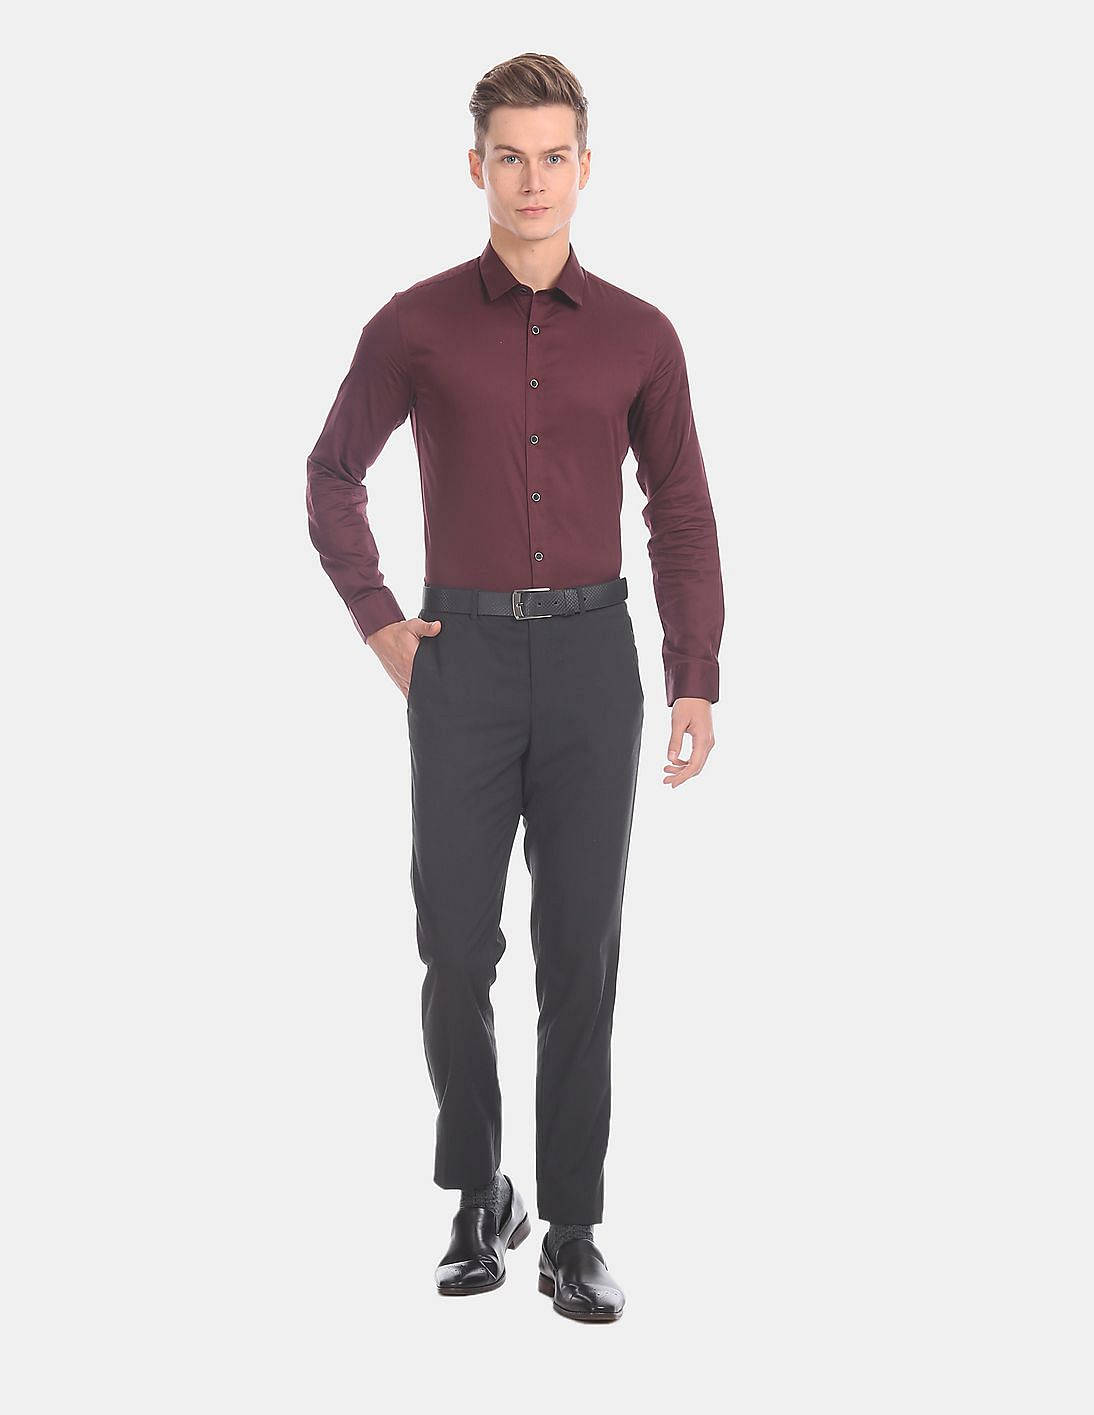 The Maroon Shirt Matching Pant Combinations For Men